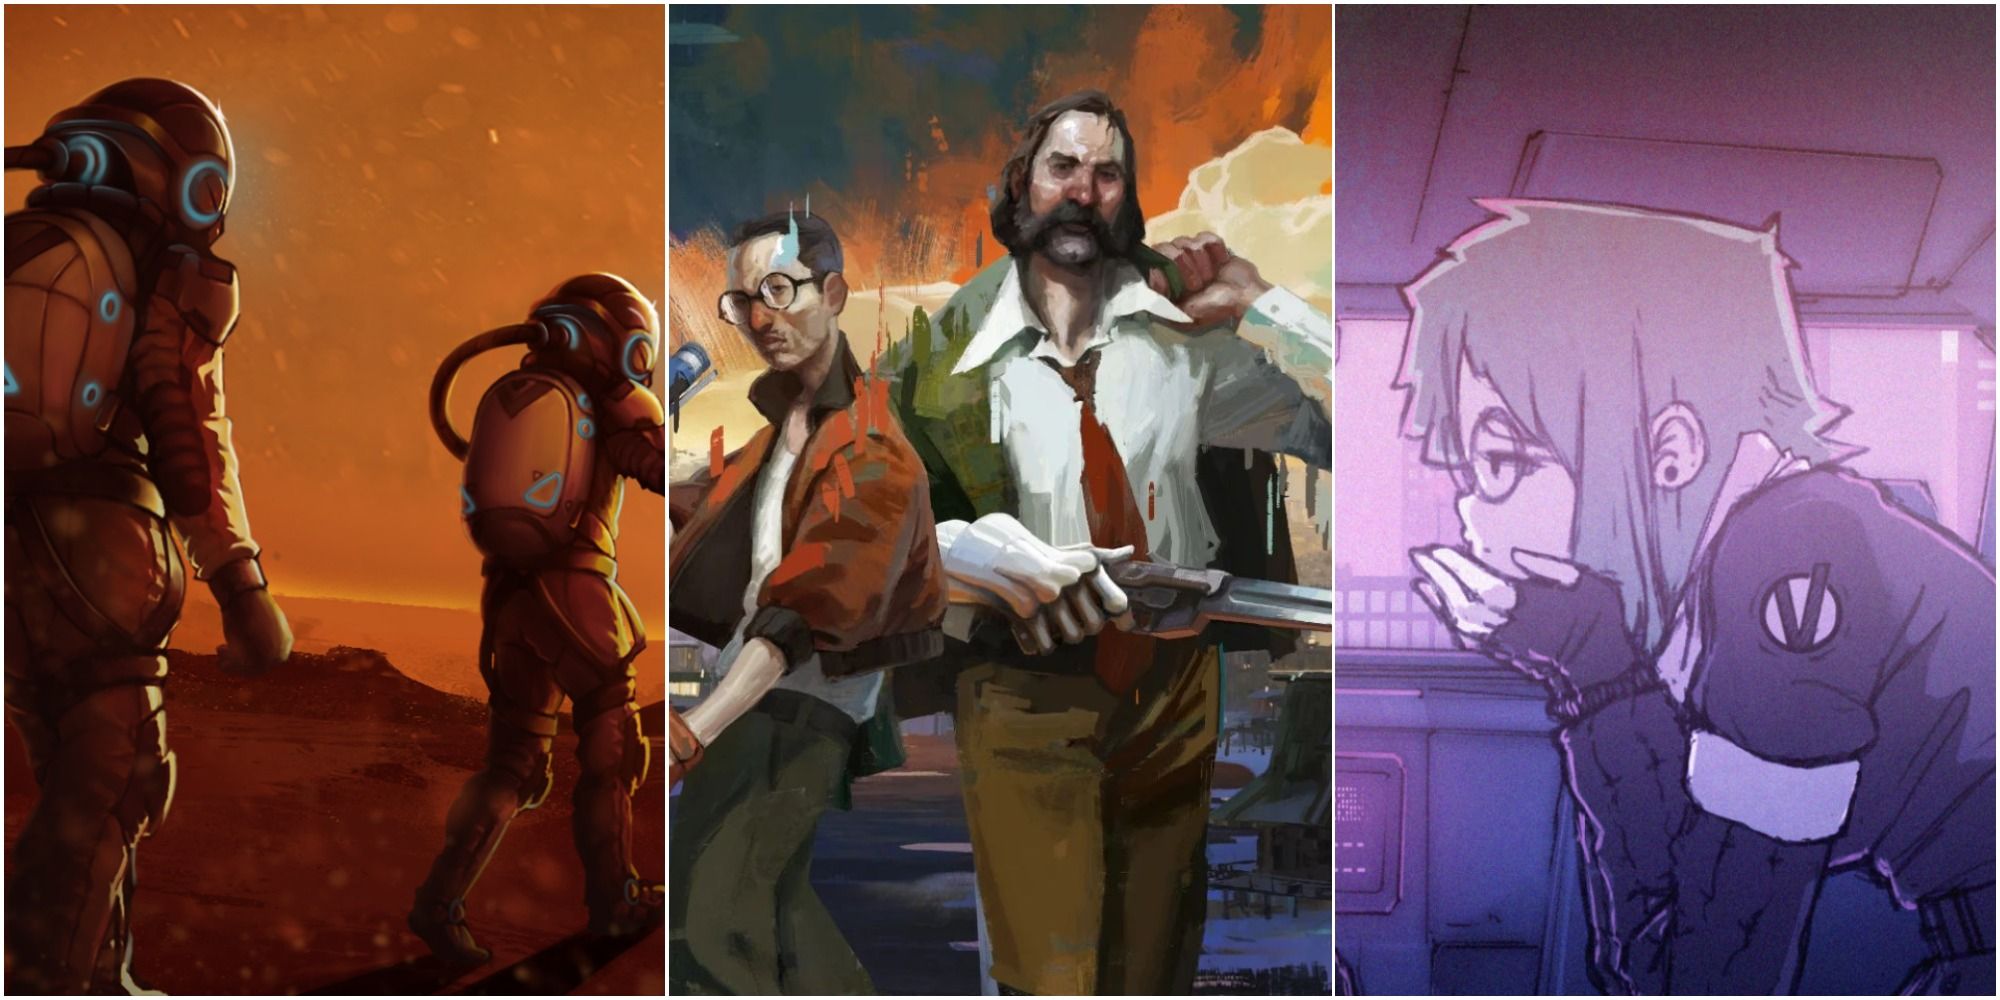 on the left is art from Tharsis, in the middle are the two protagonists from Disco Elysium and on the right is Darla from Synergia